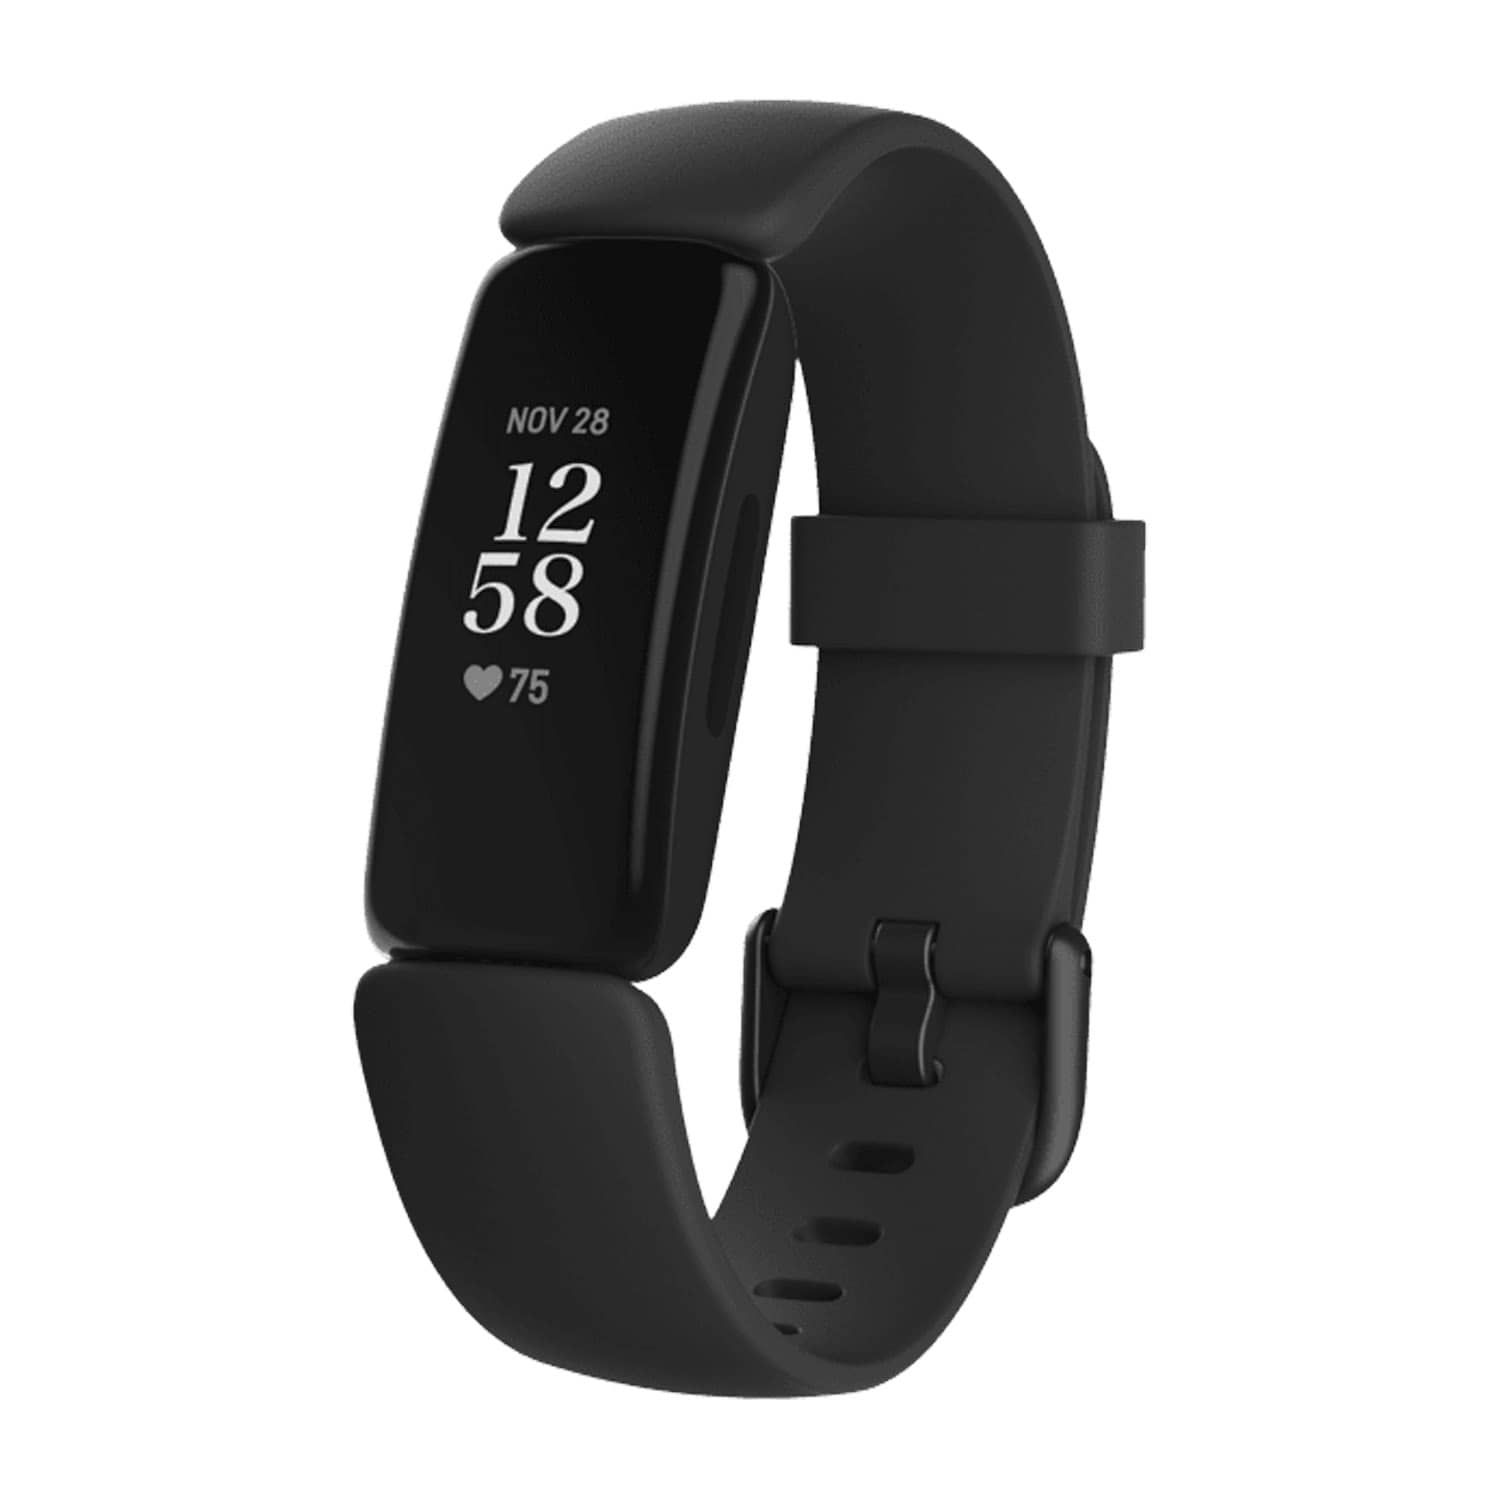 Fitbit Inspire 2 Health & Fitness Tracker with 24/7 Heart Rate